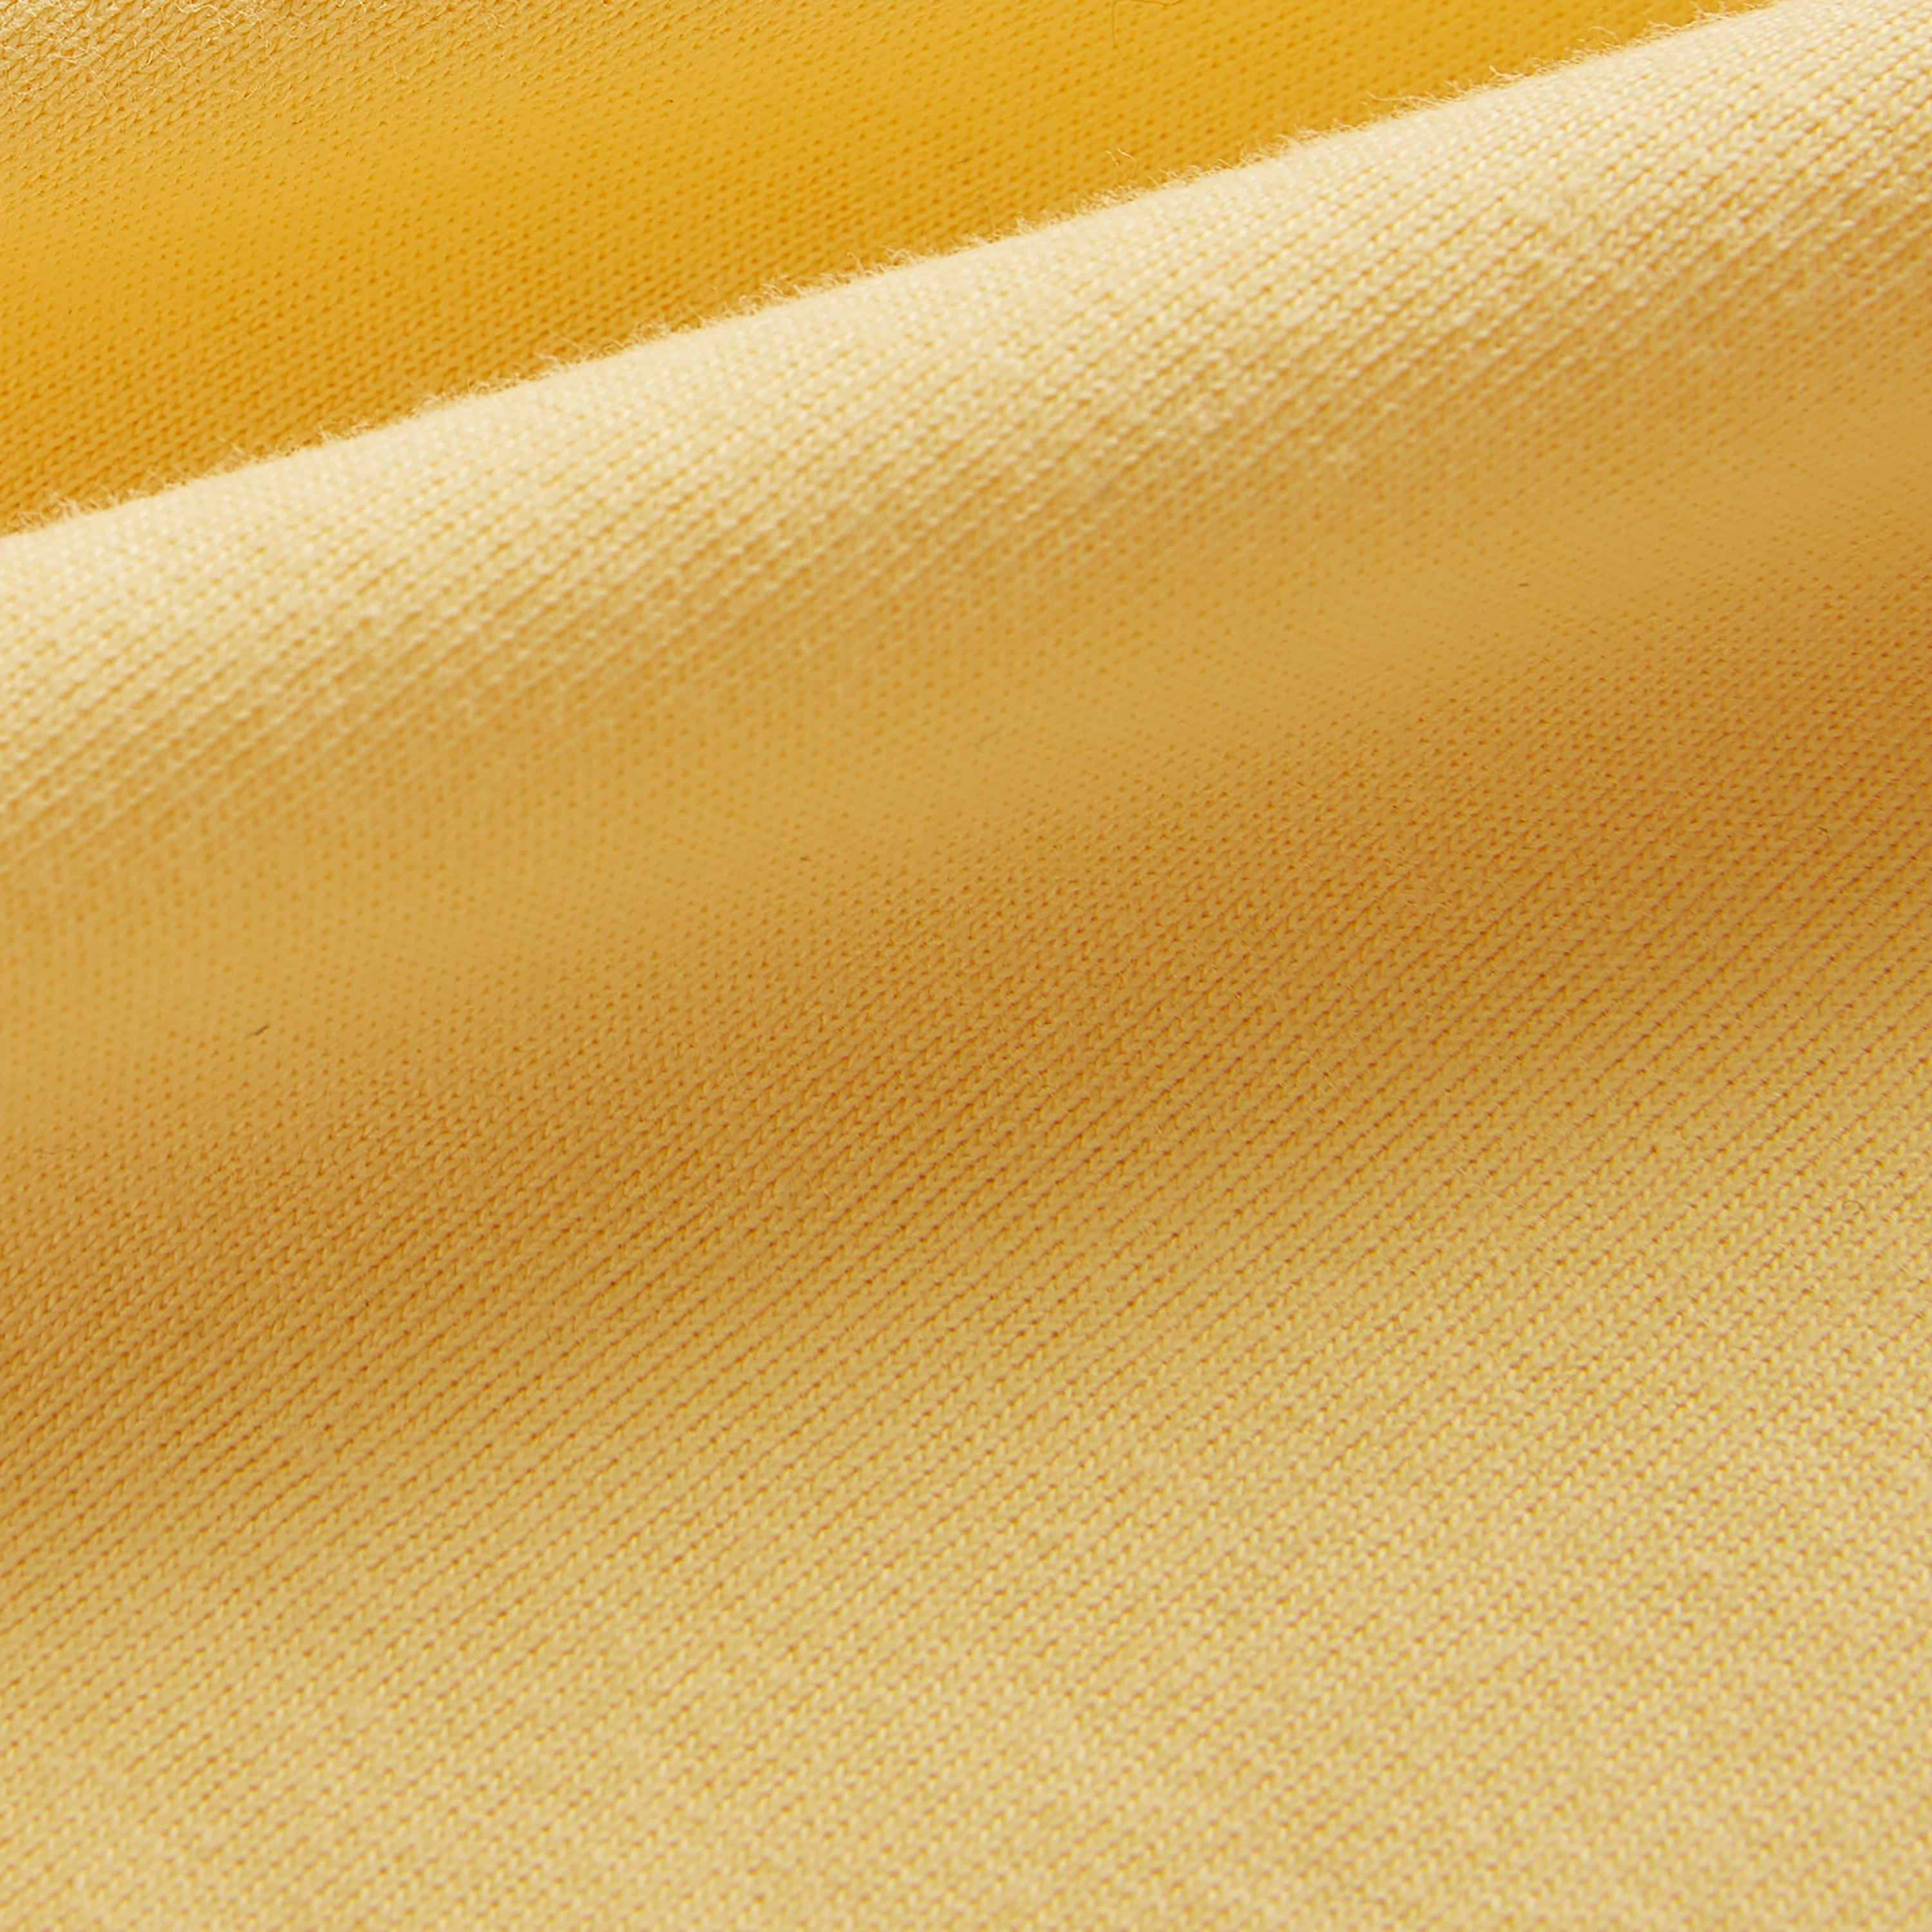 78% cotton 22% polyester 180 GSM CVC casual knitted jersey fabric